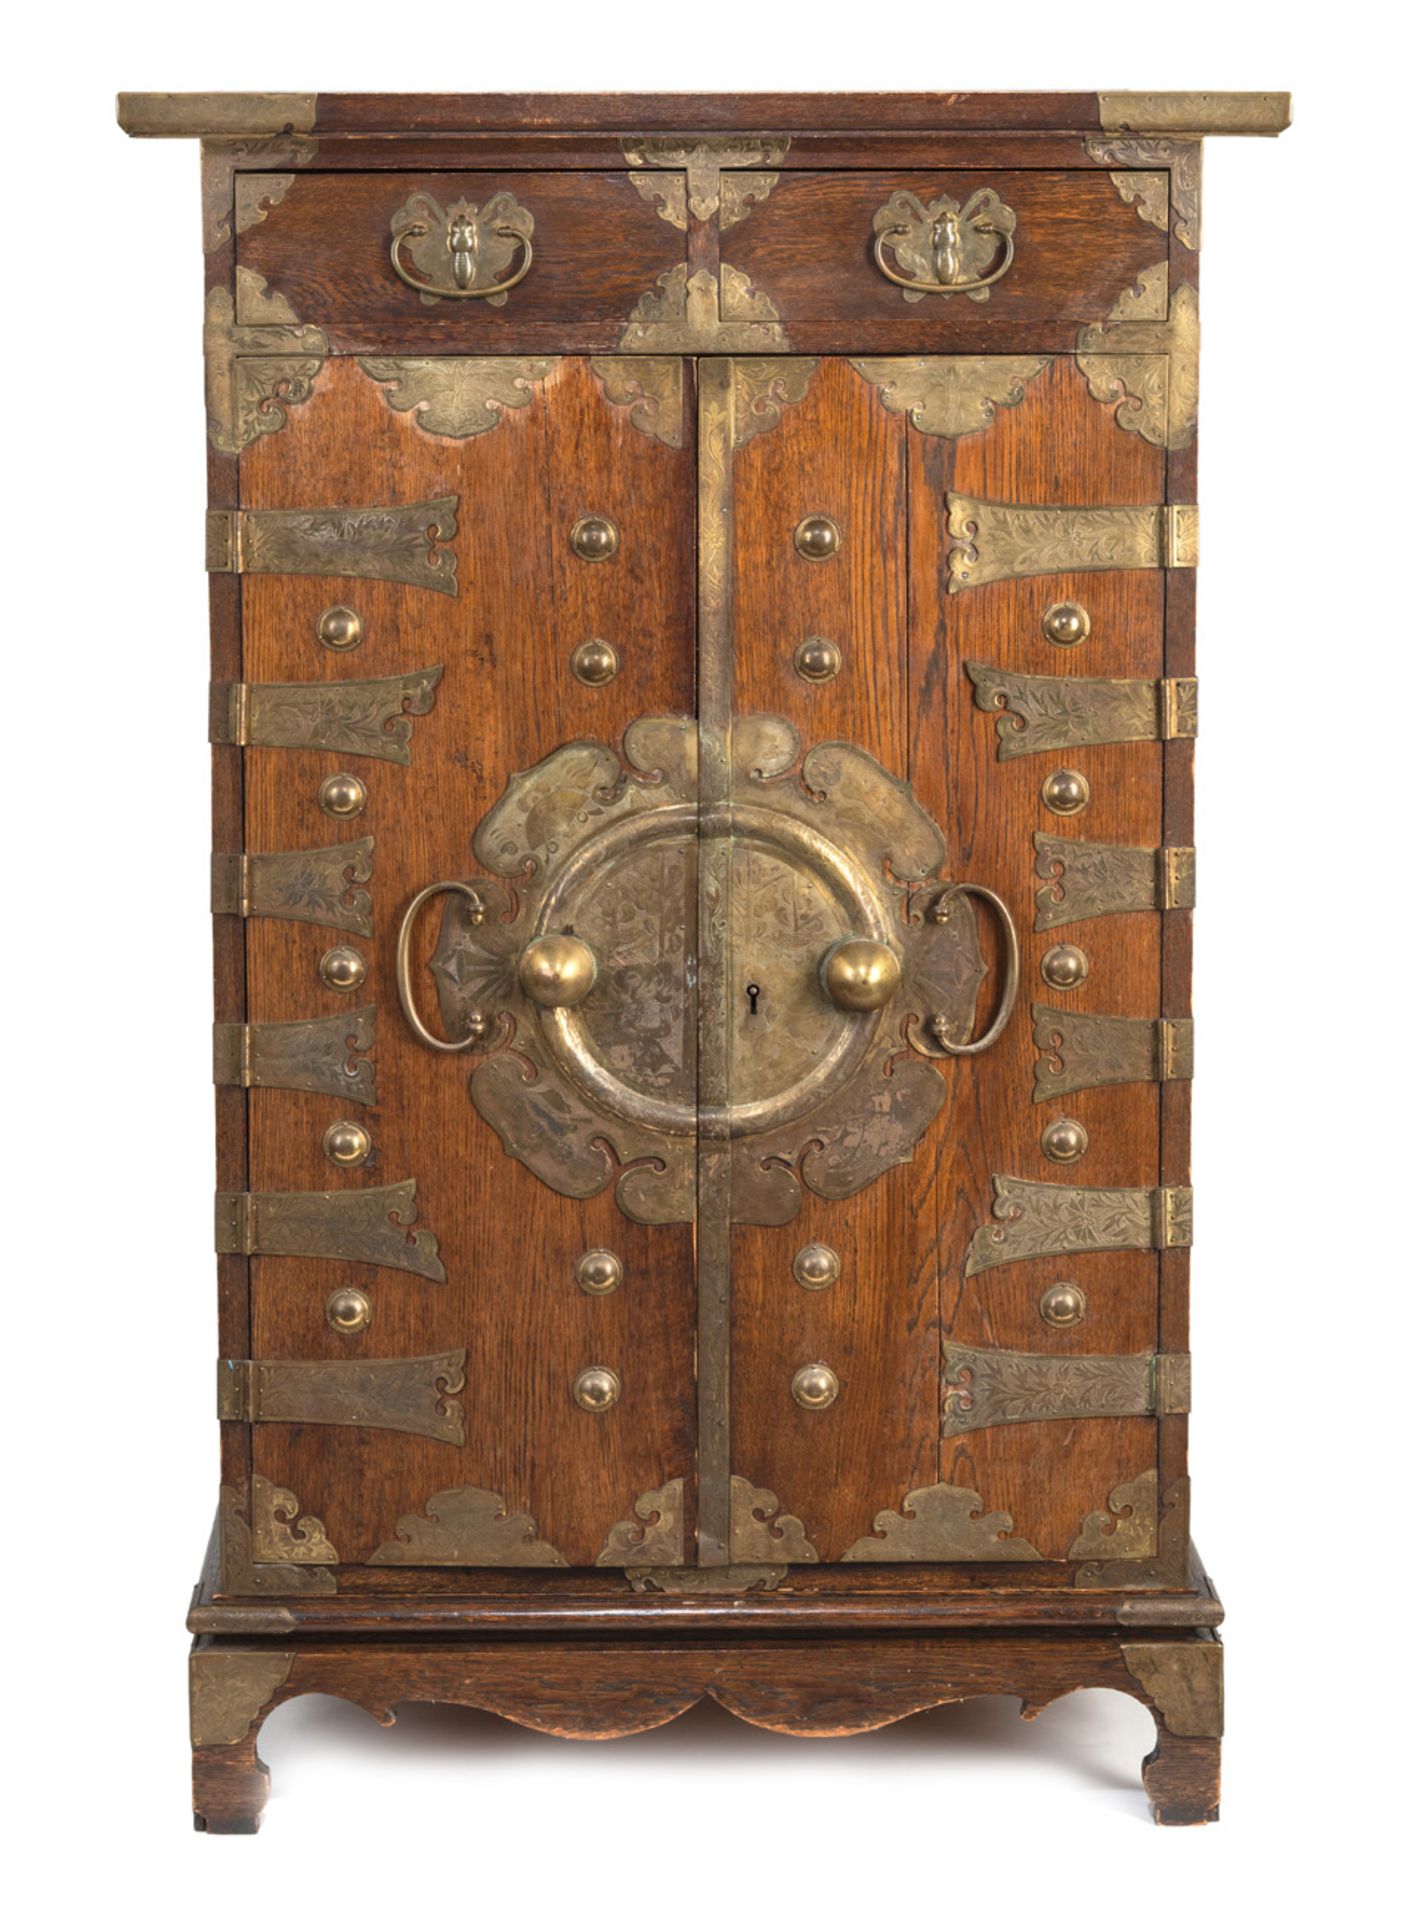 A TWO-DOOR BRASS FITTED WOOD CABINET - Image 2 of 8